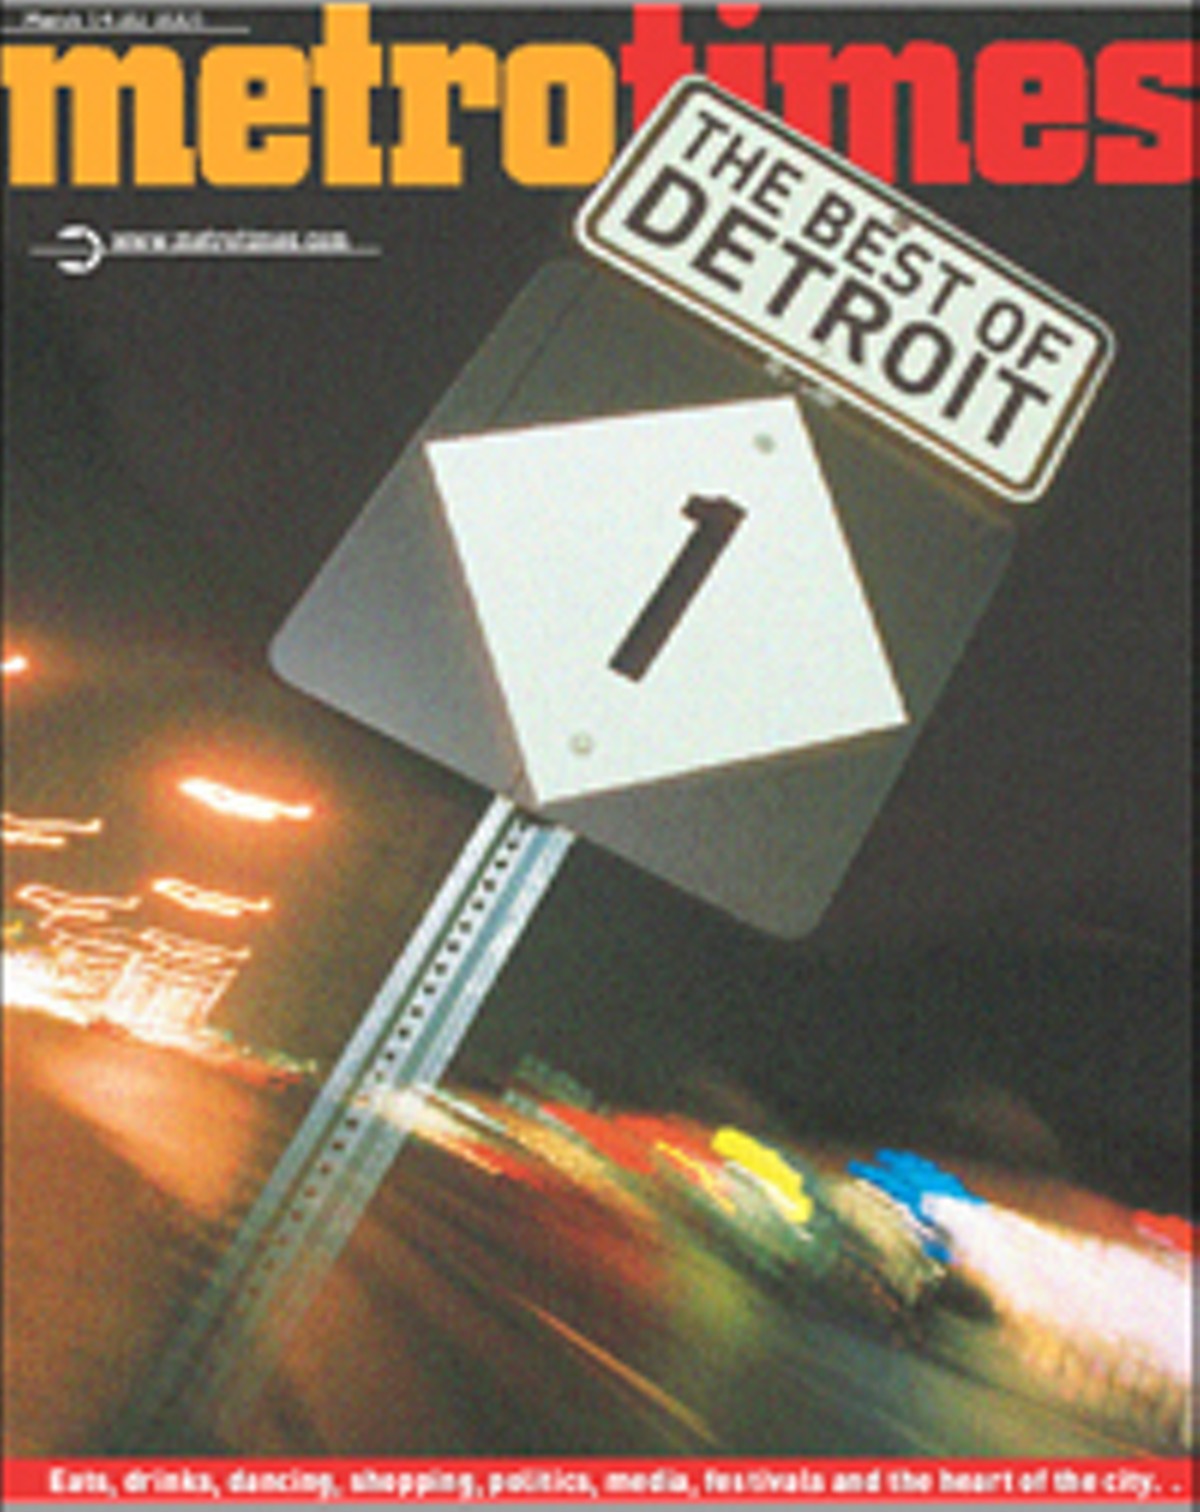 Best of Detroit 2001 Issue Cover